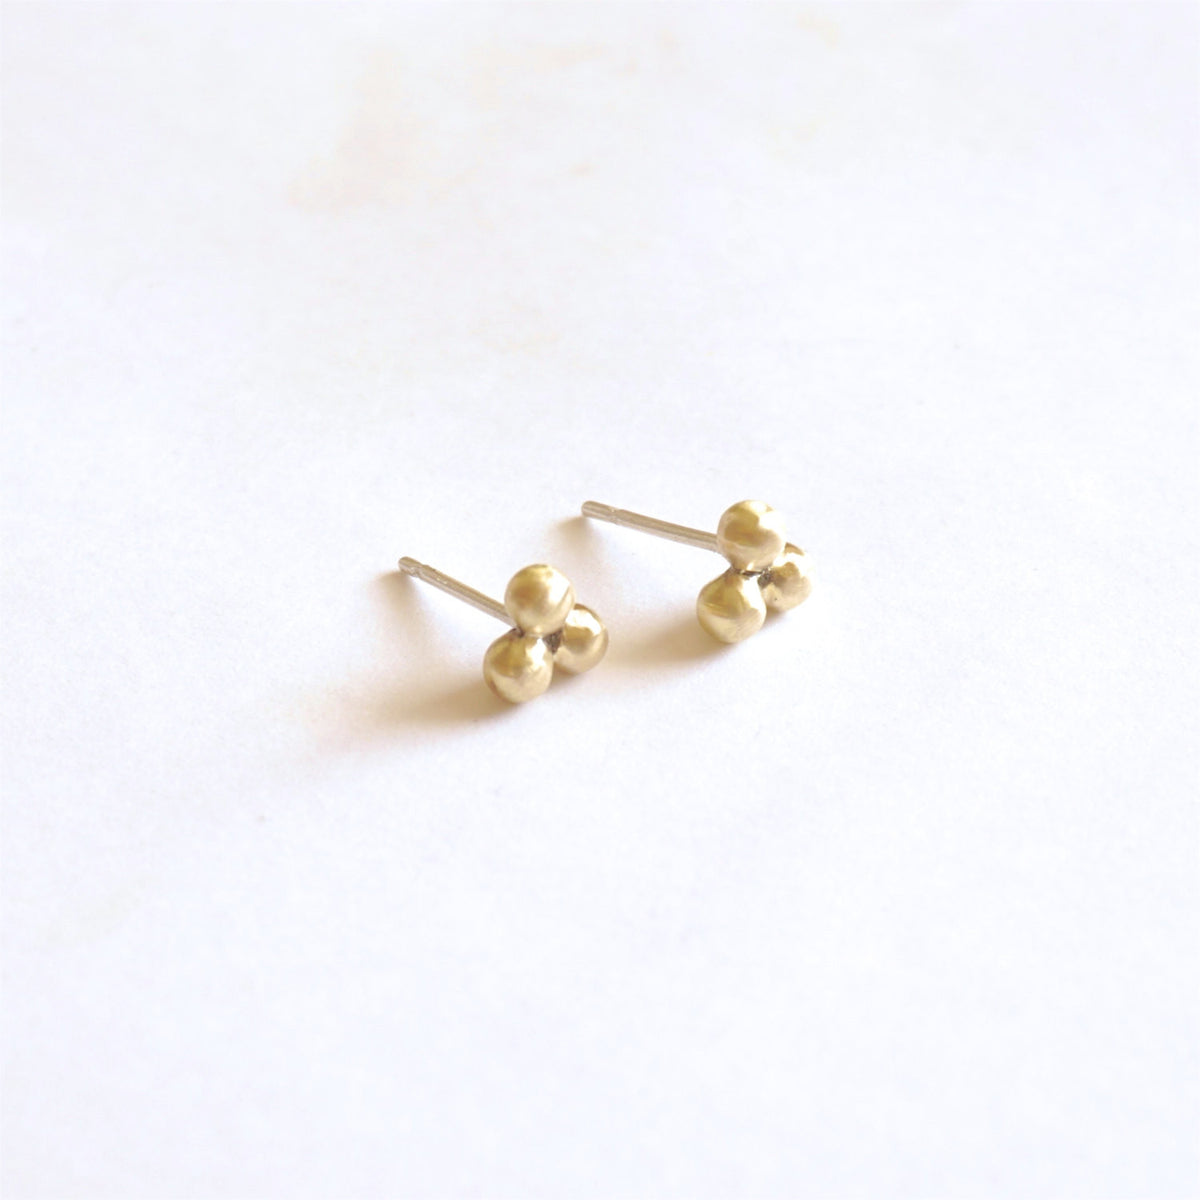 Understated and Stylish Hand-Made Three Ball Stud Earrings  - 0243 - Virginia Wynne Designs